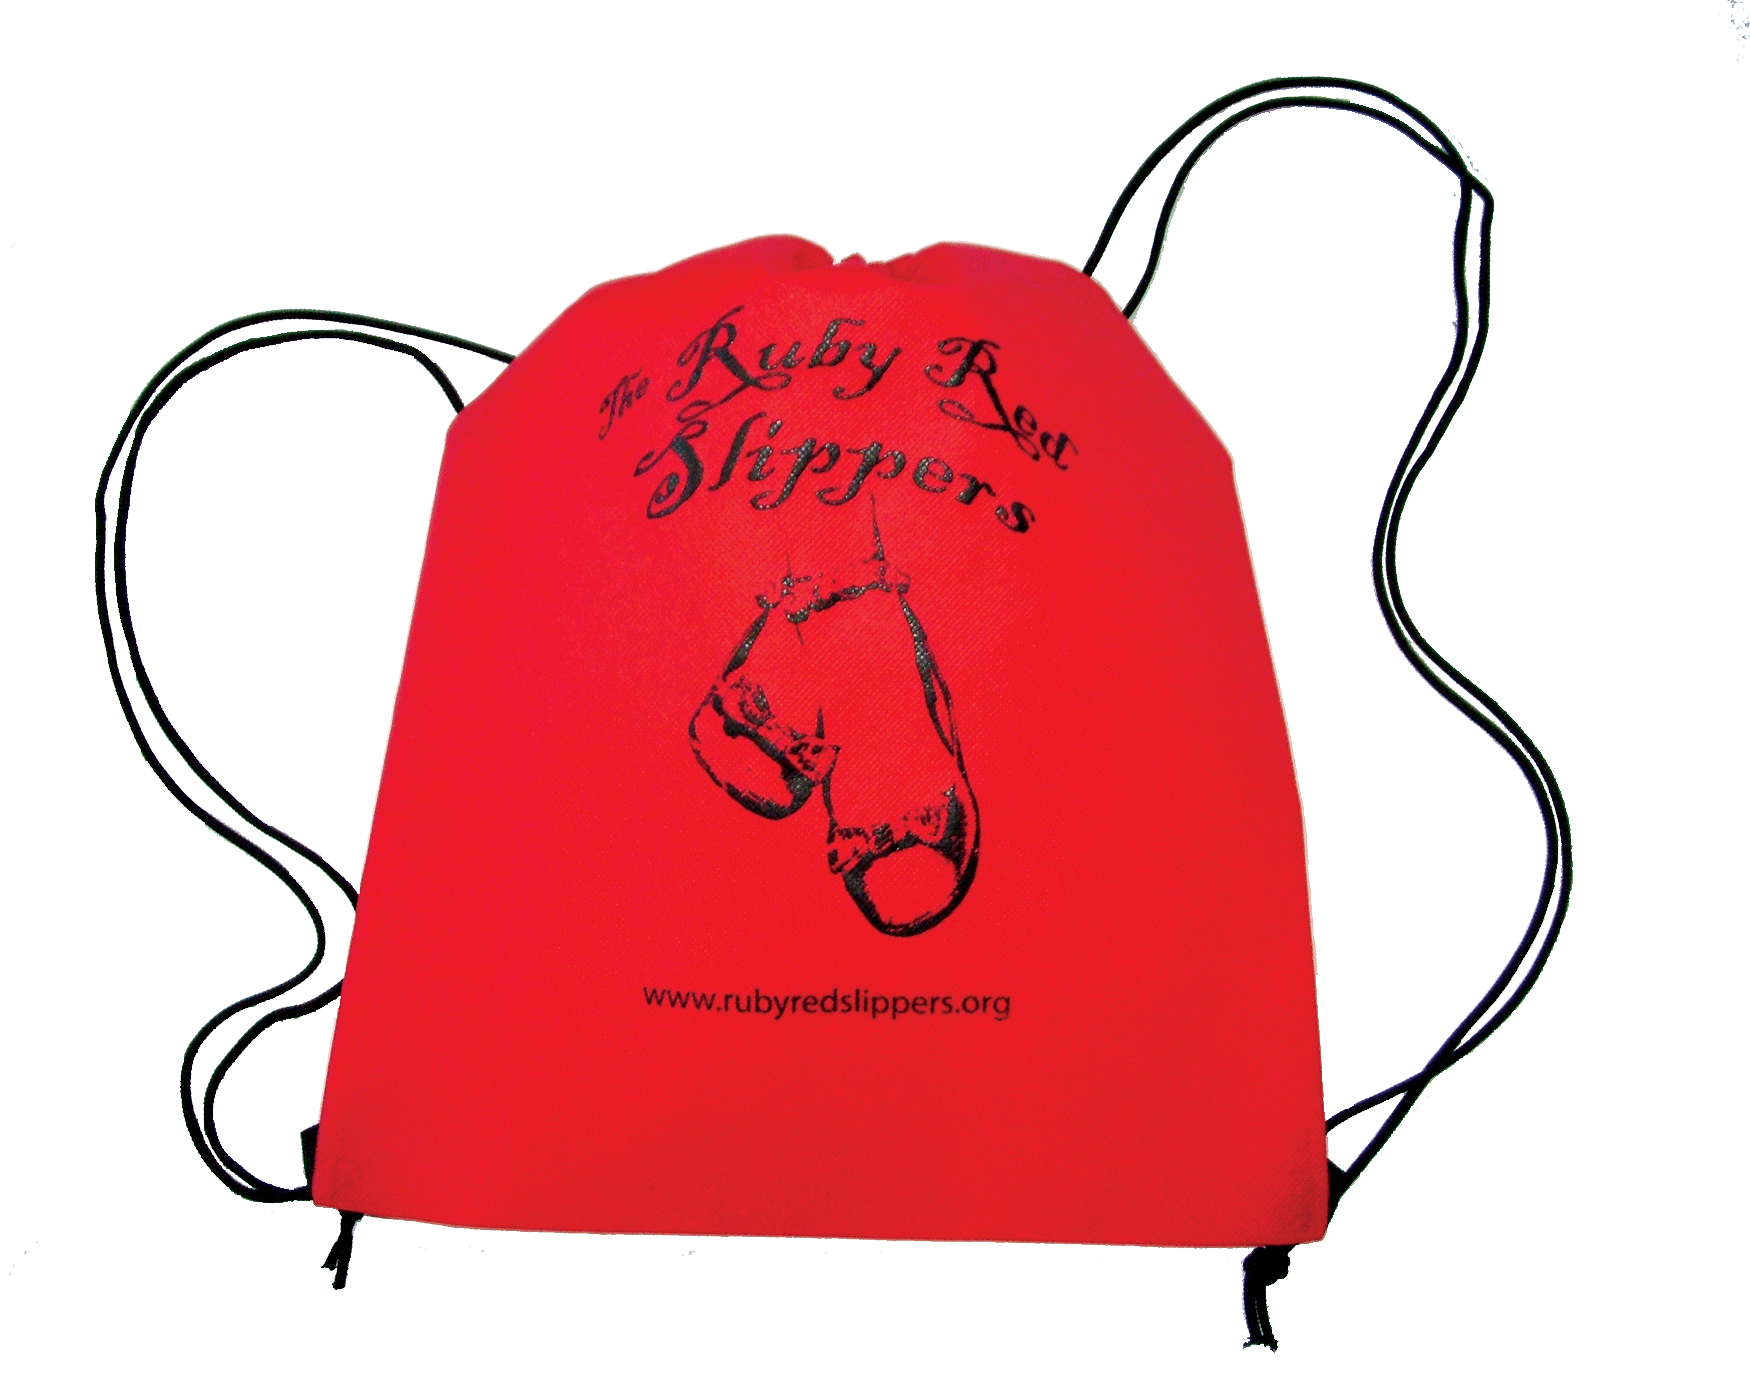 The Ruby Red Slippers Drawstring Bag